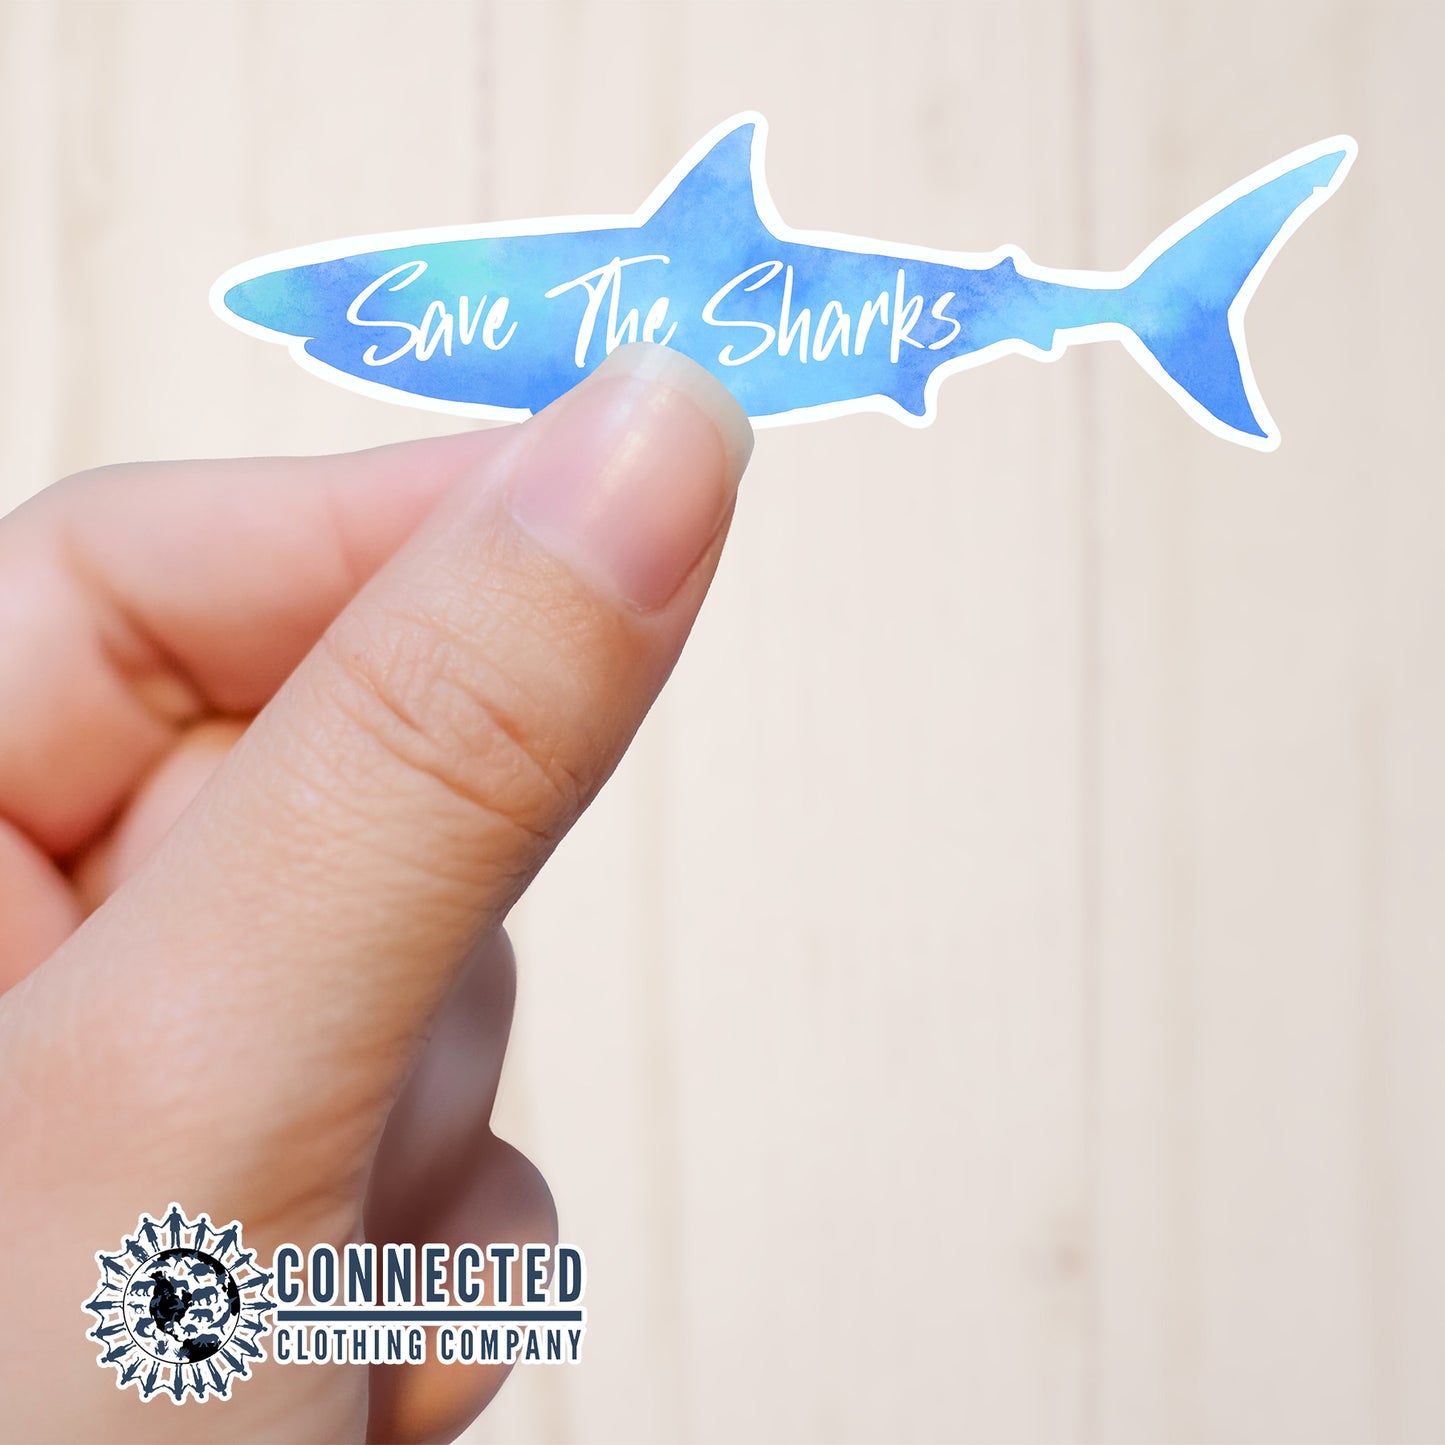 Save The Sharks Sticker - Connected Clothing Company - 10% of proceeds donated to ocean conservation